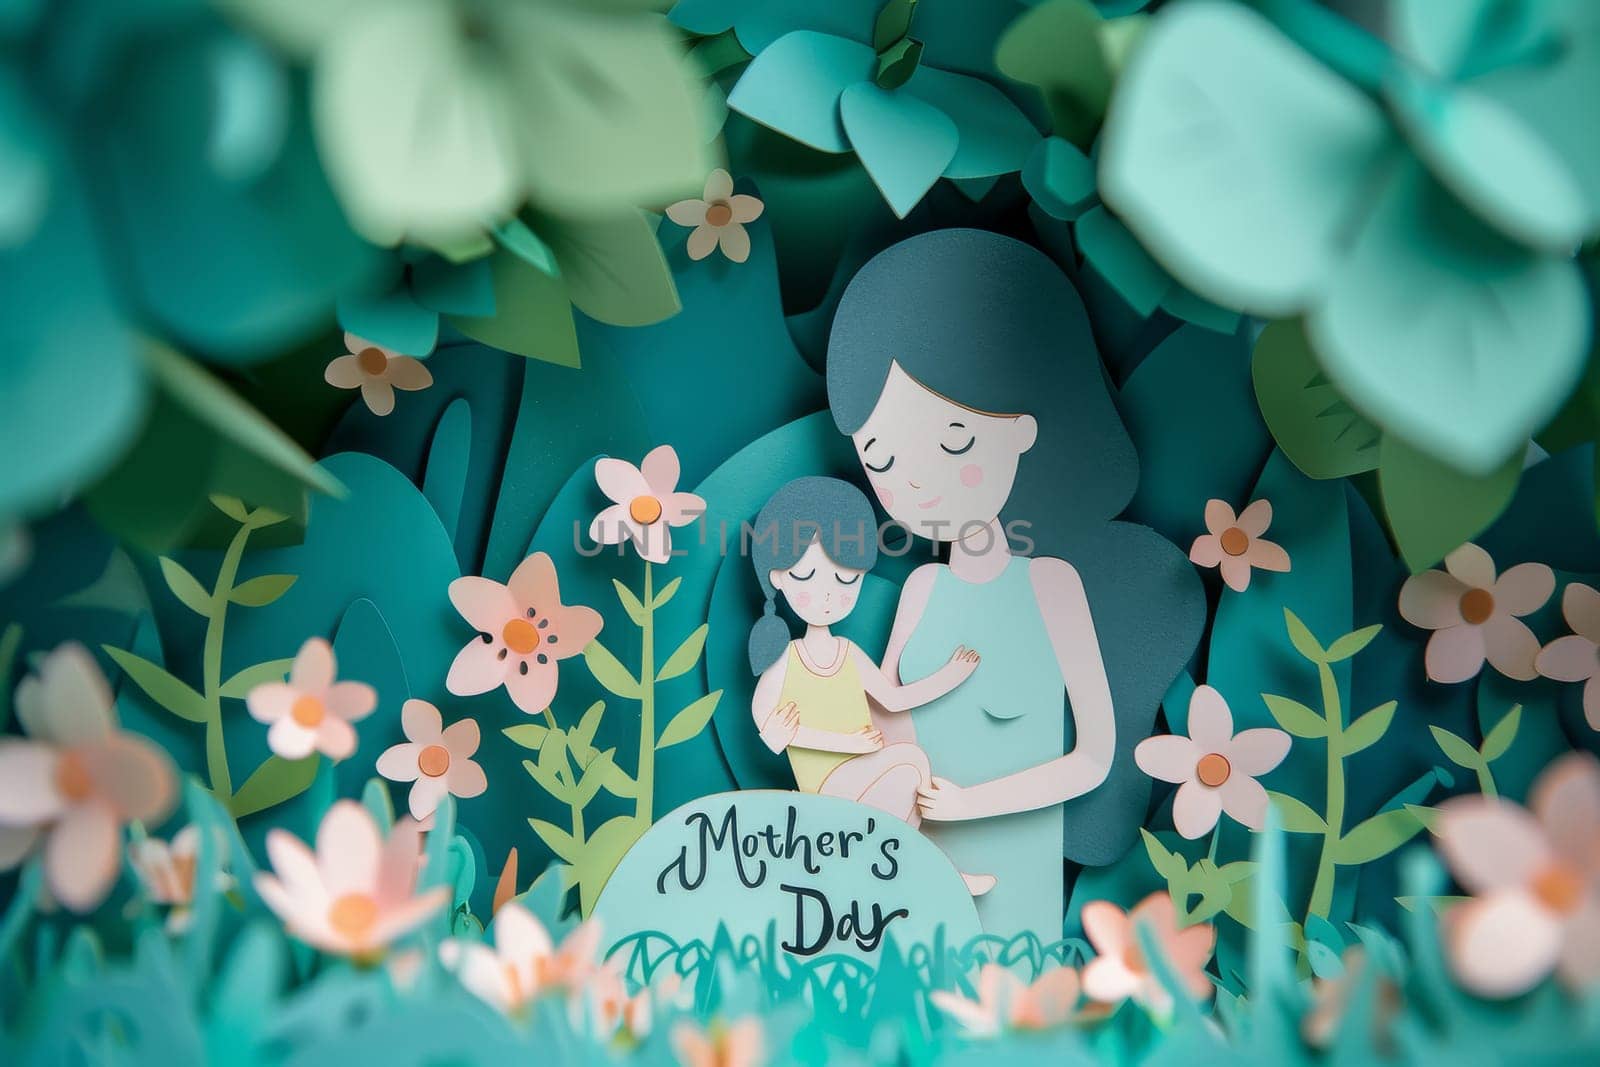 A blue and white Mother's Day card with a woman and child on it by itchaznong